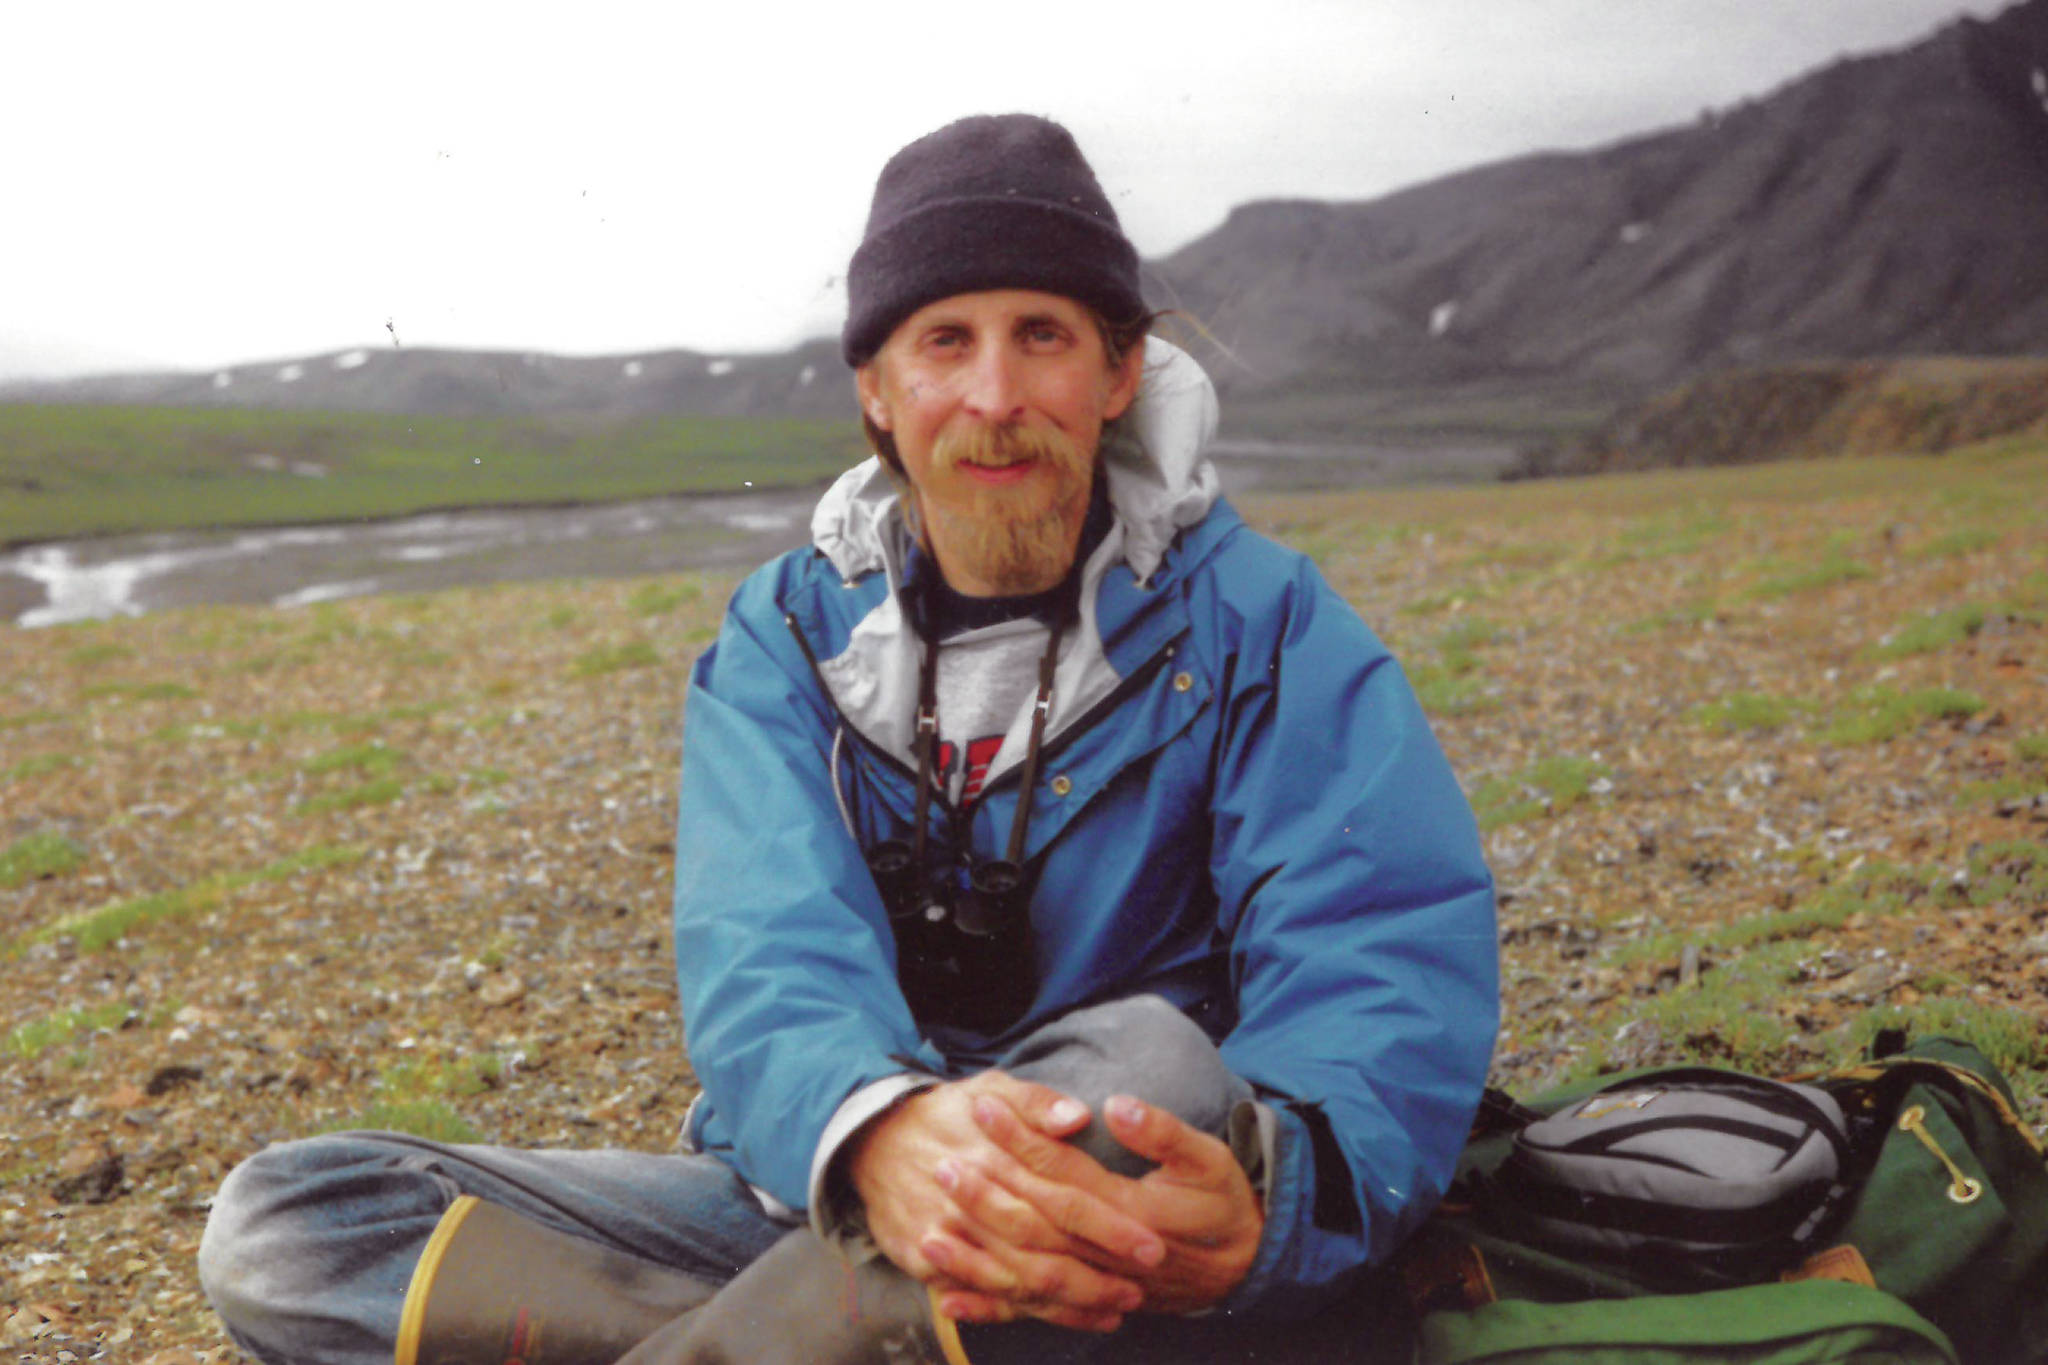 Michael Armstrong is properly outfitted for an Arctic summer hiking trip in this photo taken in 1989 along the Wulik River in northeastern Alaska. (Photo by Charles Barnwell.)